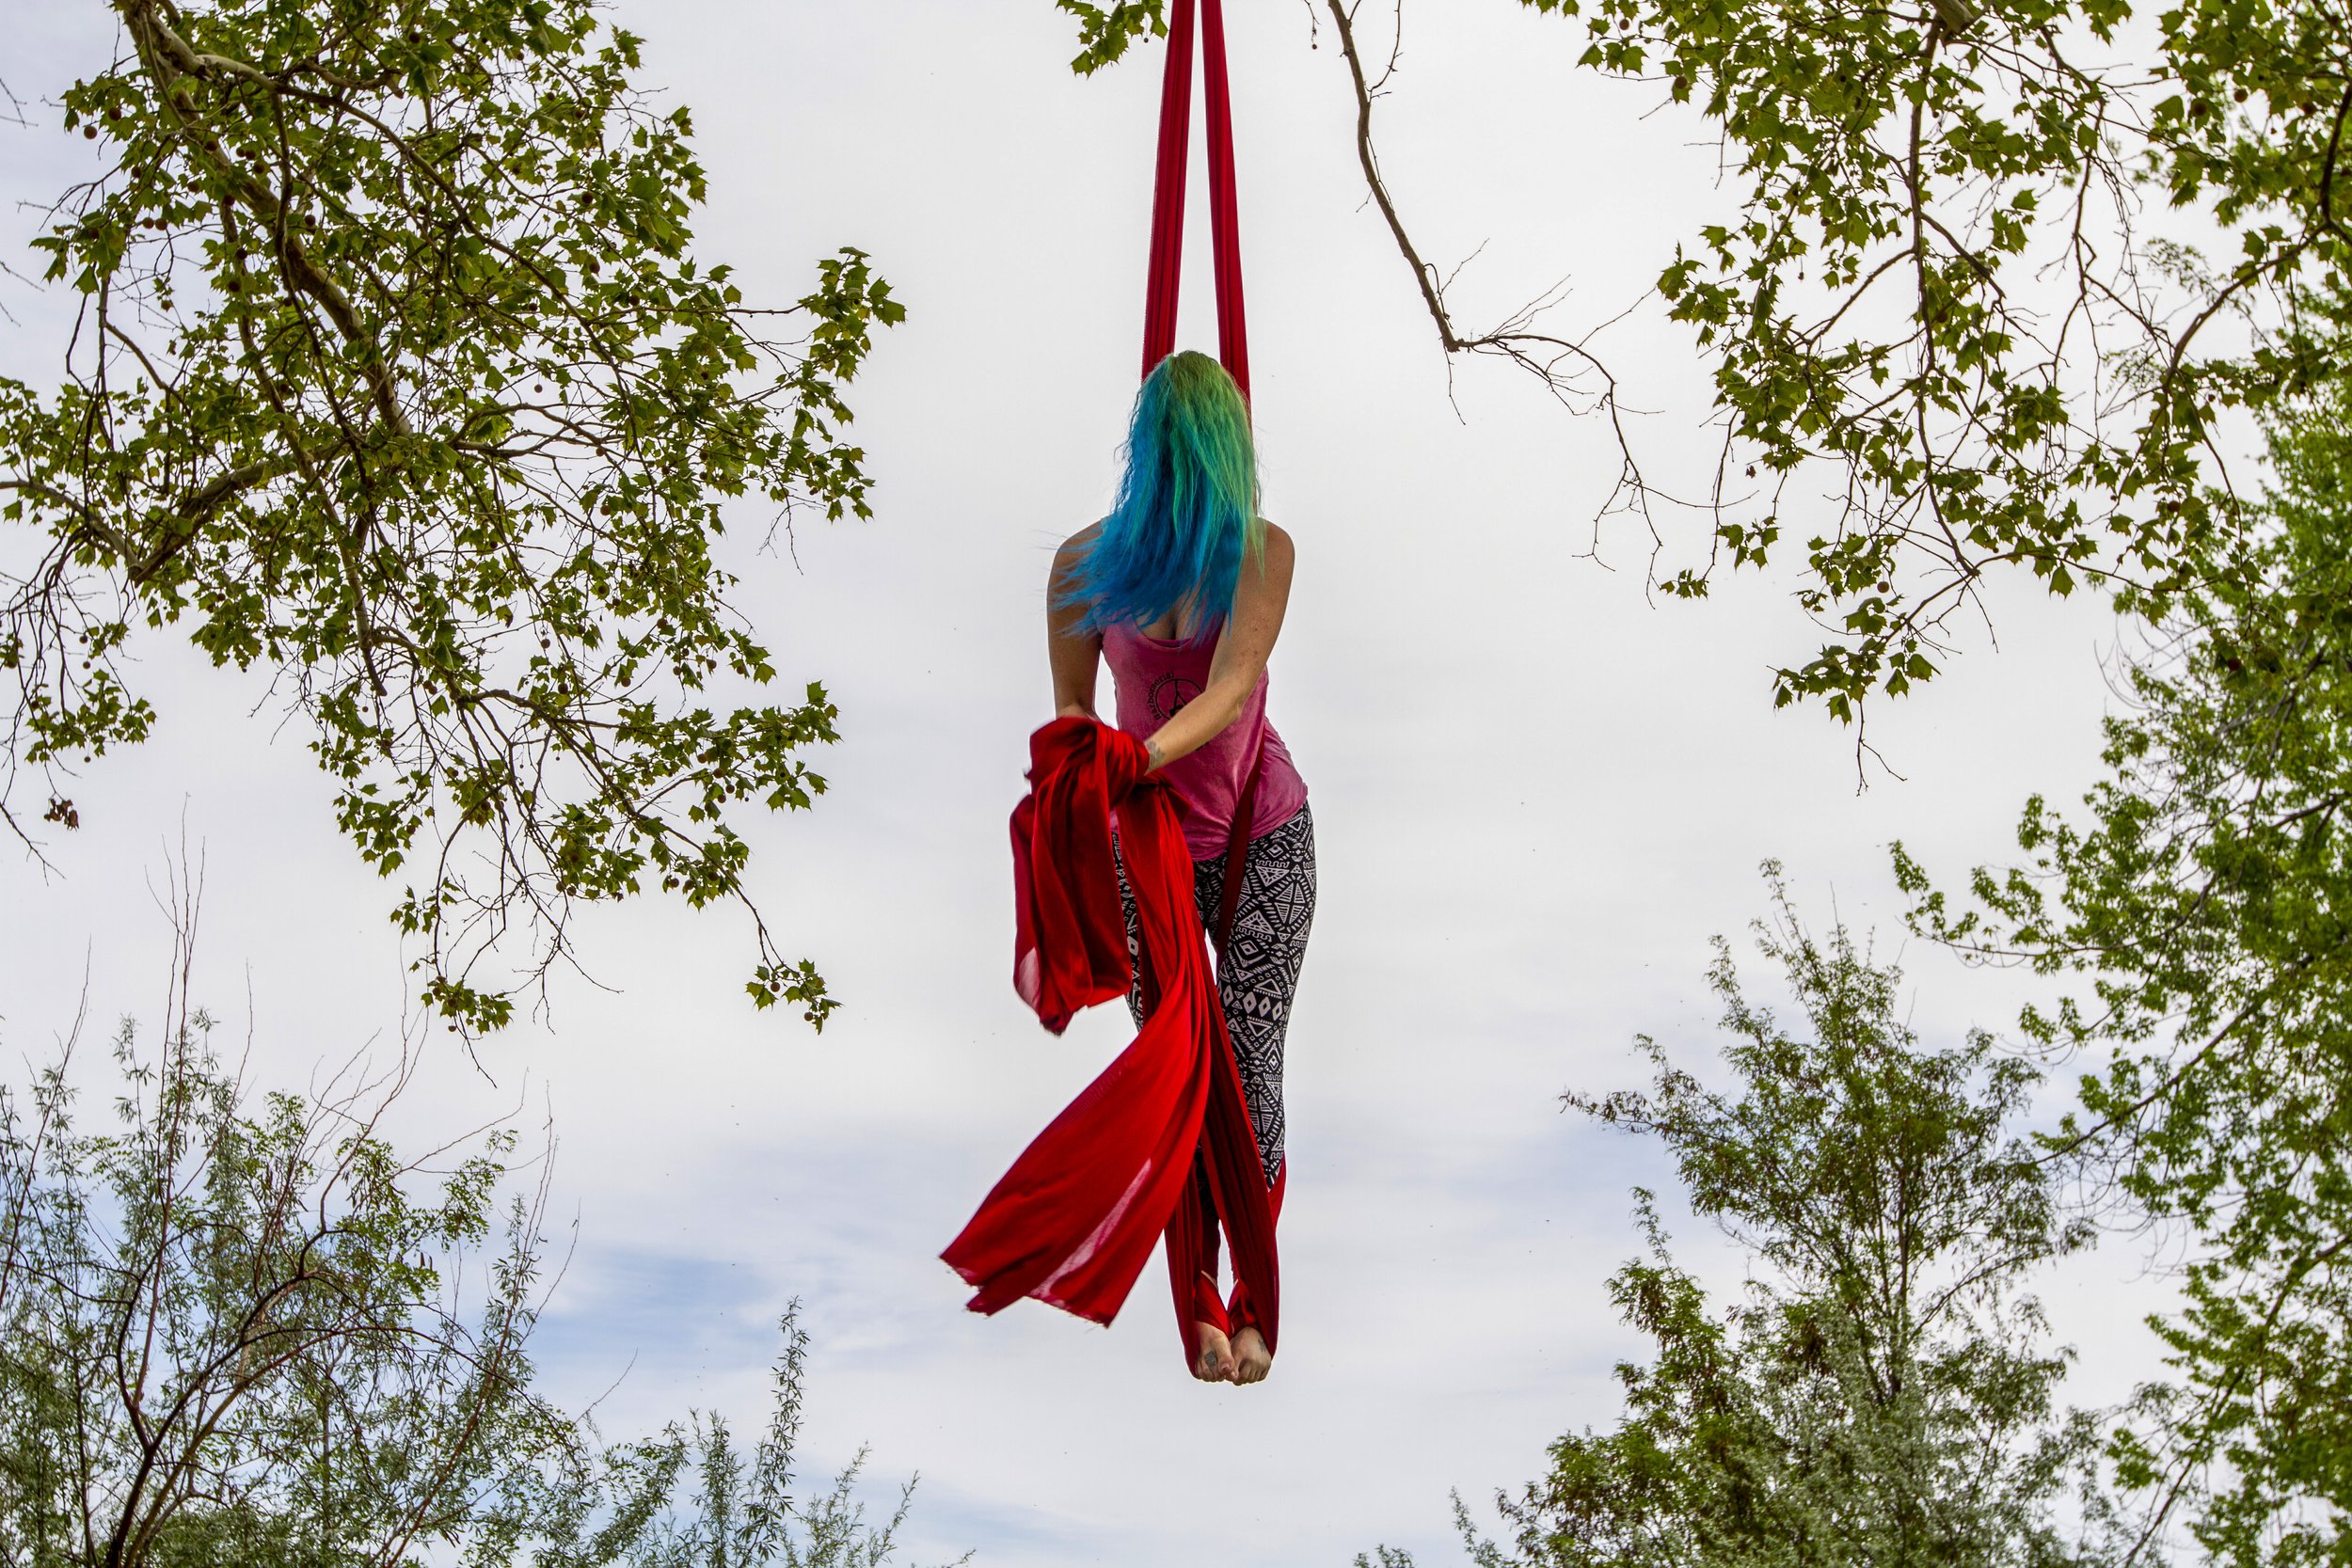  Briana Groneman, 27, practices on aerial silks in Columbia Park on Tuesday (April 29, 2020). She recently moved to the Tri-Cities area and is practicing for the first time since an accident a year and a half ago left her unable to do her aerial rout